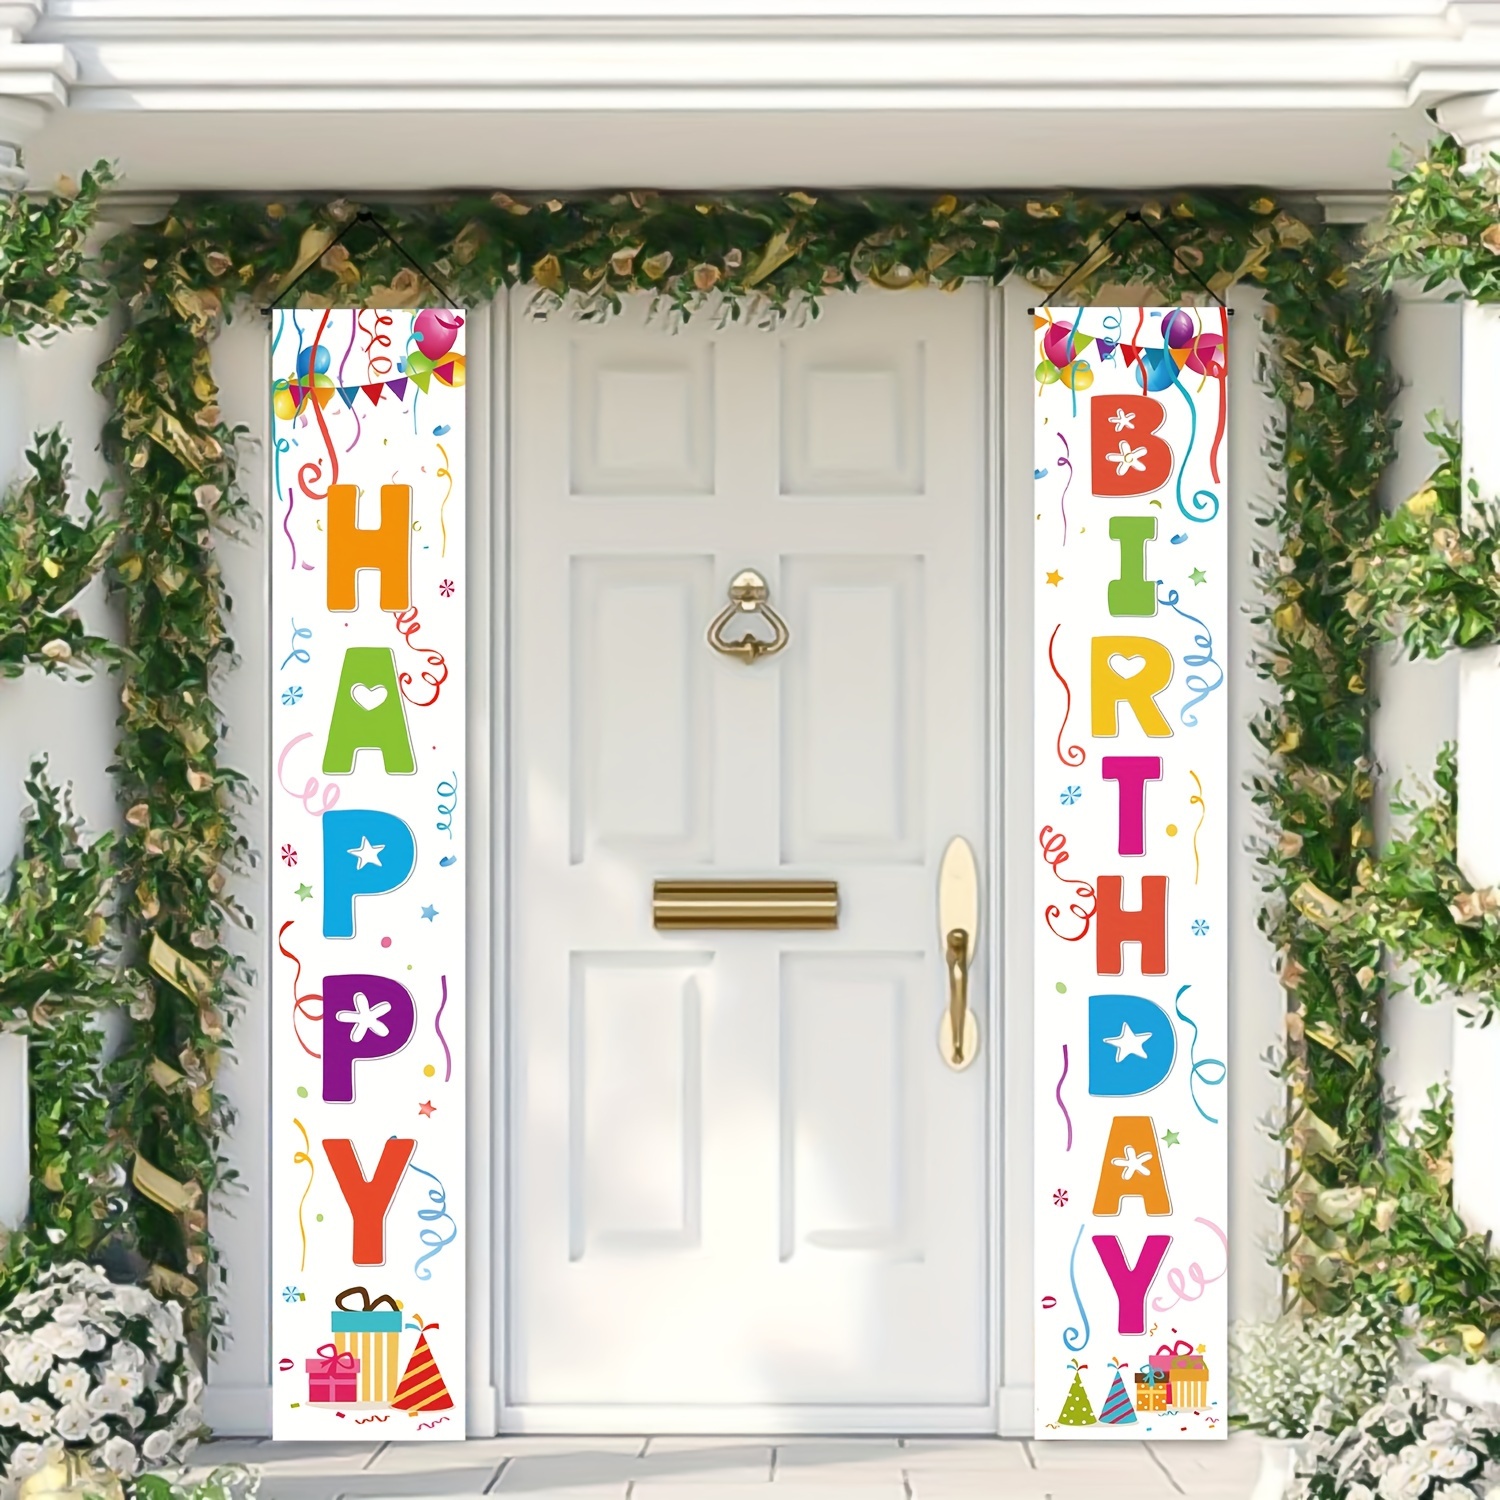 

Polyester Happy Birthday Door Banner - Porch Sign Party Supplies For Garden, Spring, Summer, Fall, Winter Celebrations - 70.9 X 11.8 Inch Decorative Banner For Kids Birthday Background Decoration